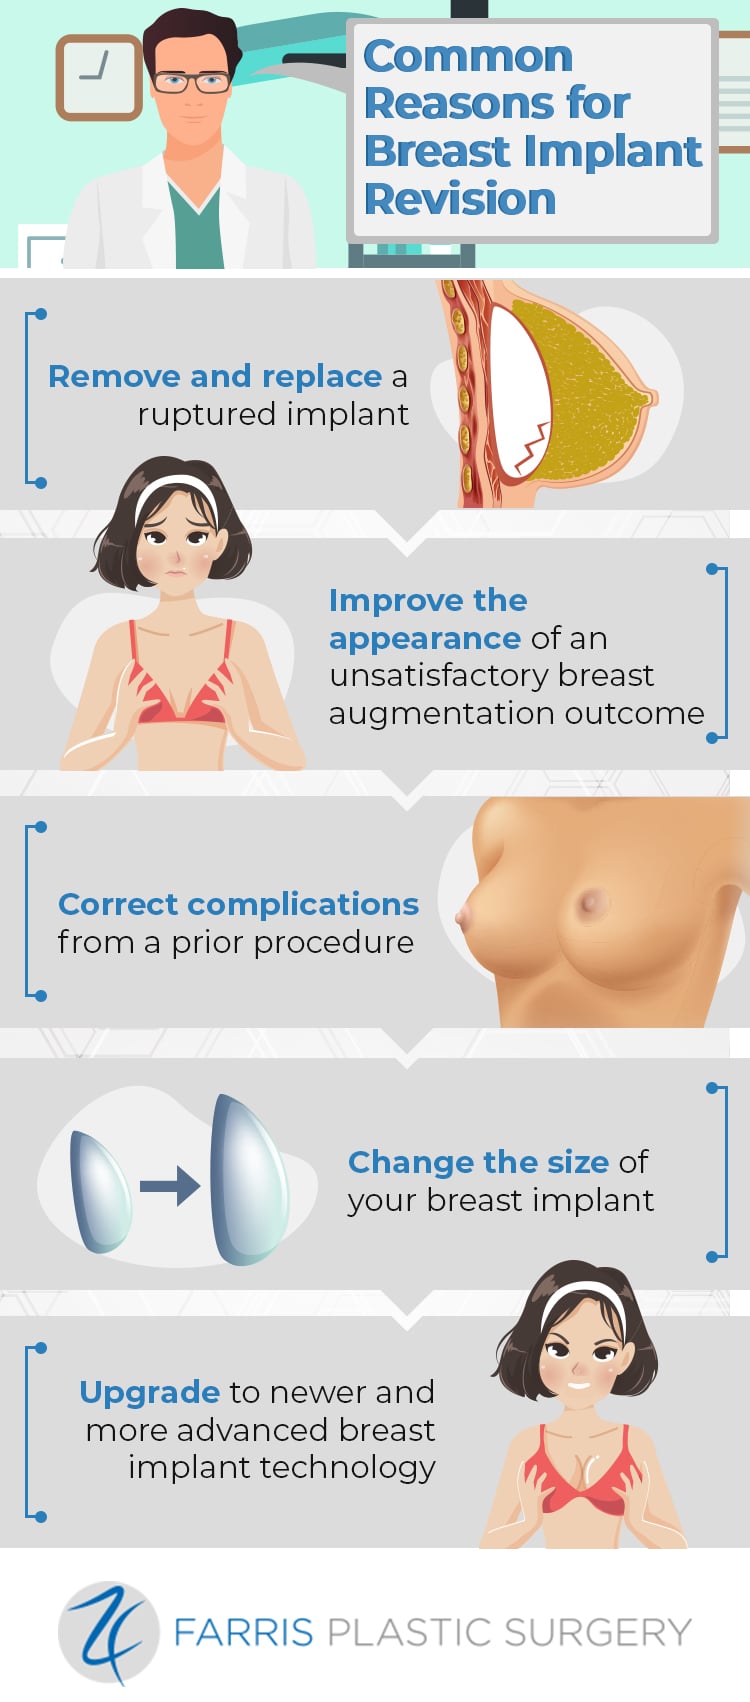 10 Things to Tell Patients Considering a Breast Enhancement or BBL